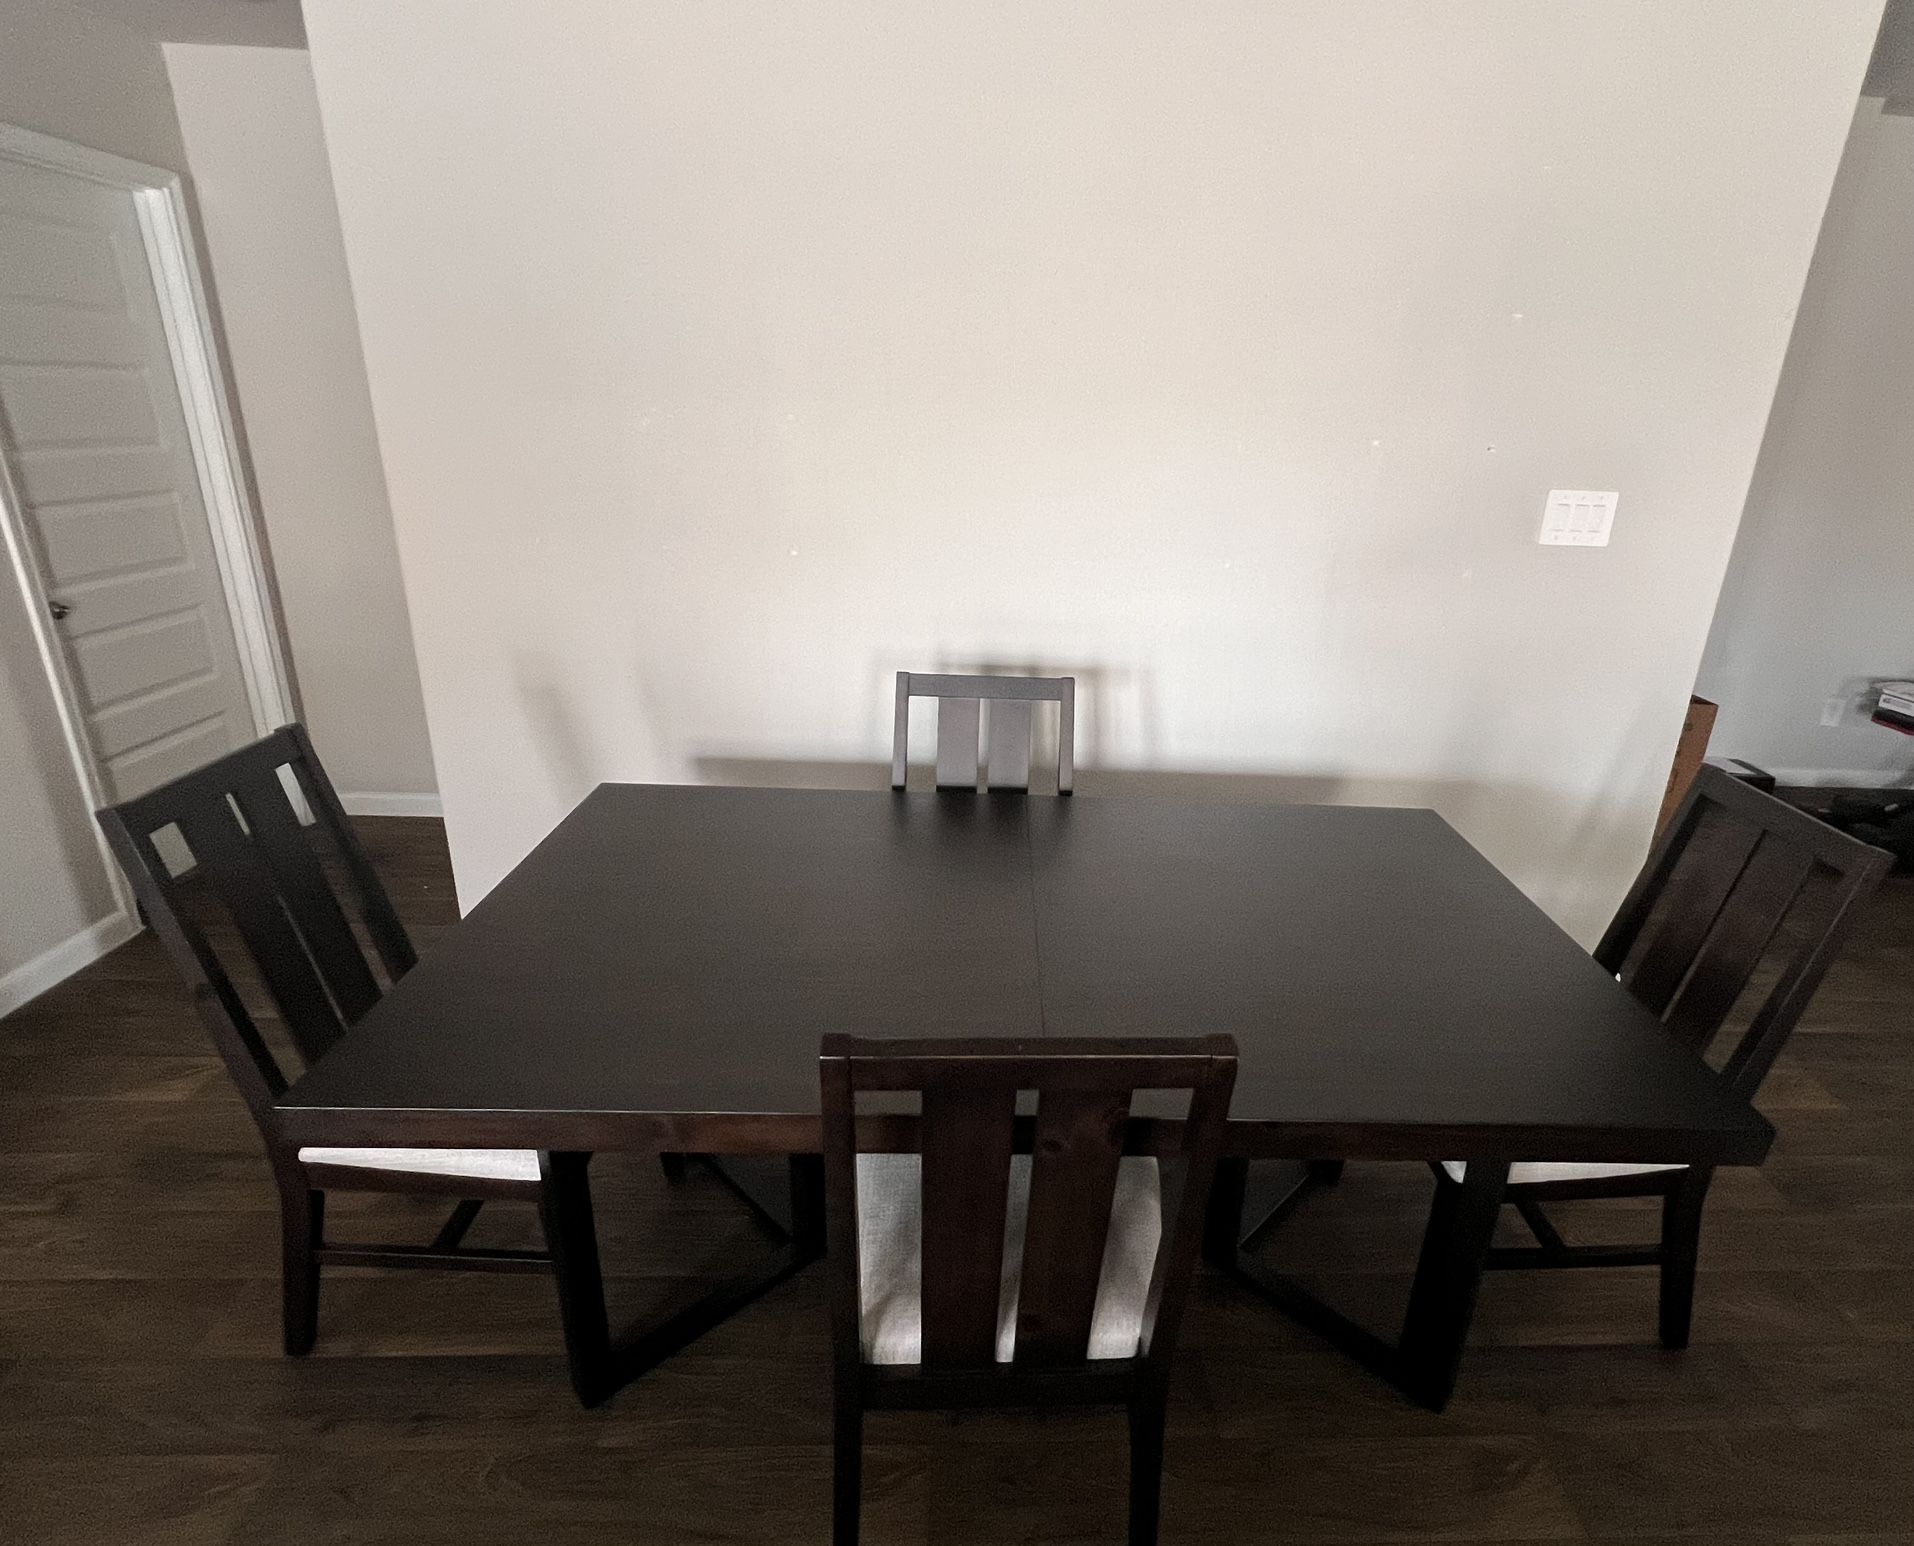  Emiliano Extension Dining Set $600 OBO